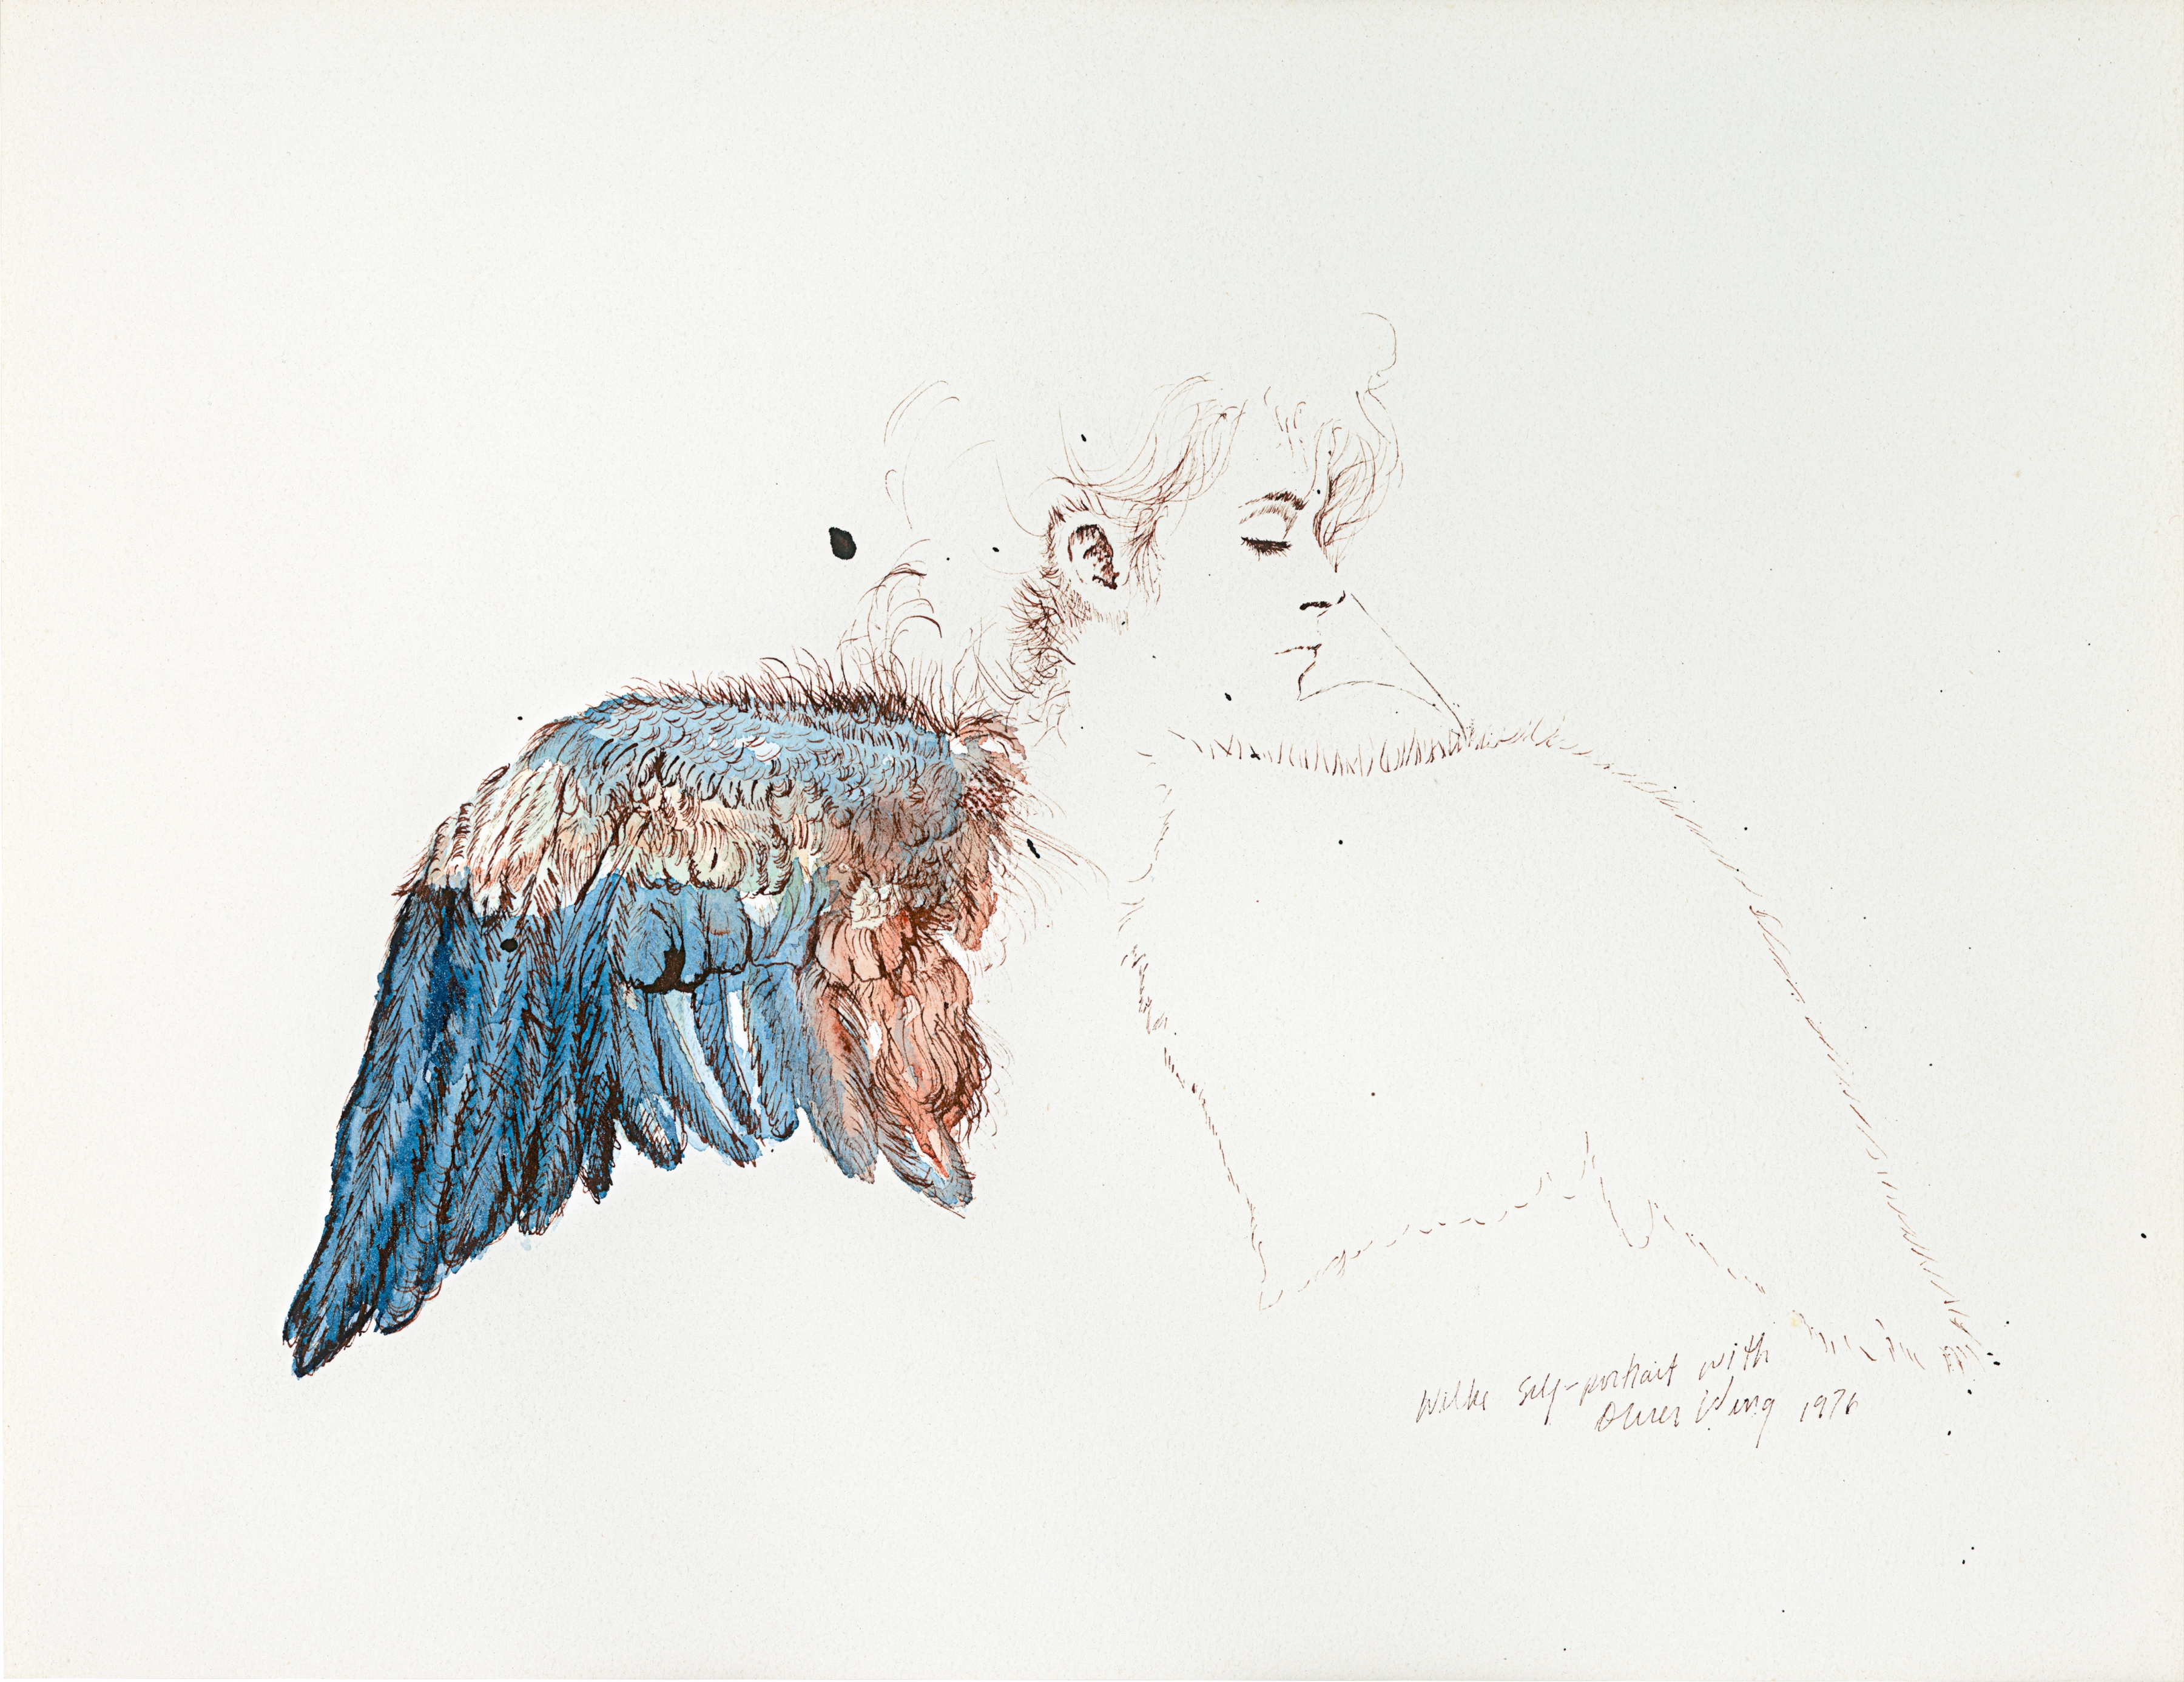 Hannah Wilke 
Self-Portrait as Angel with D&amp;uuml;rer Wing, 1976
Watercolor and sepia ink on paper
12 &amp;times; 15 inches (30.5 &amp;times; 38.1 cm)
Hannah Wilke Collection &amp;amp; Archive, Los Angeles.
Courtesy Alison Jacques, London.